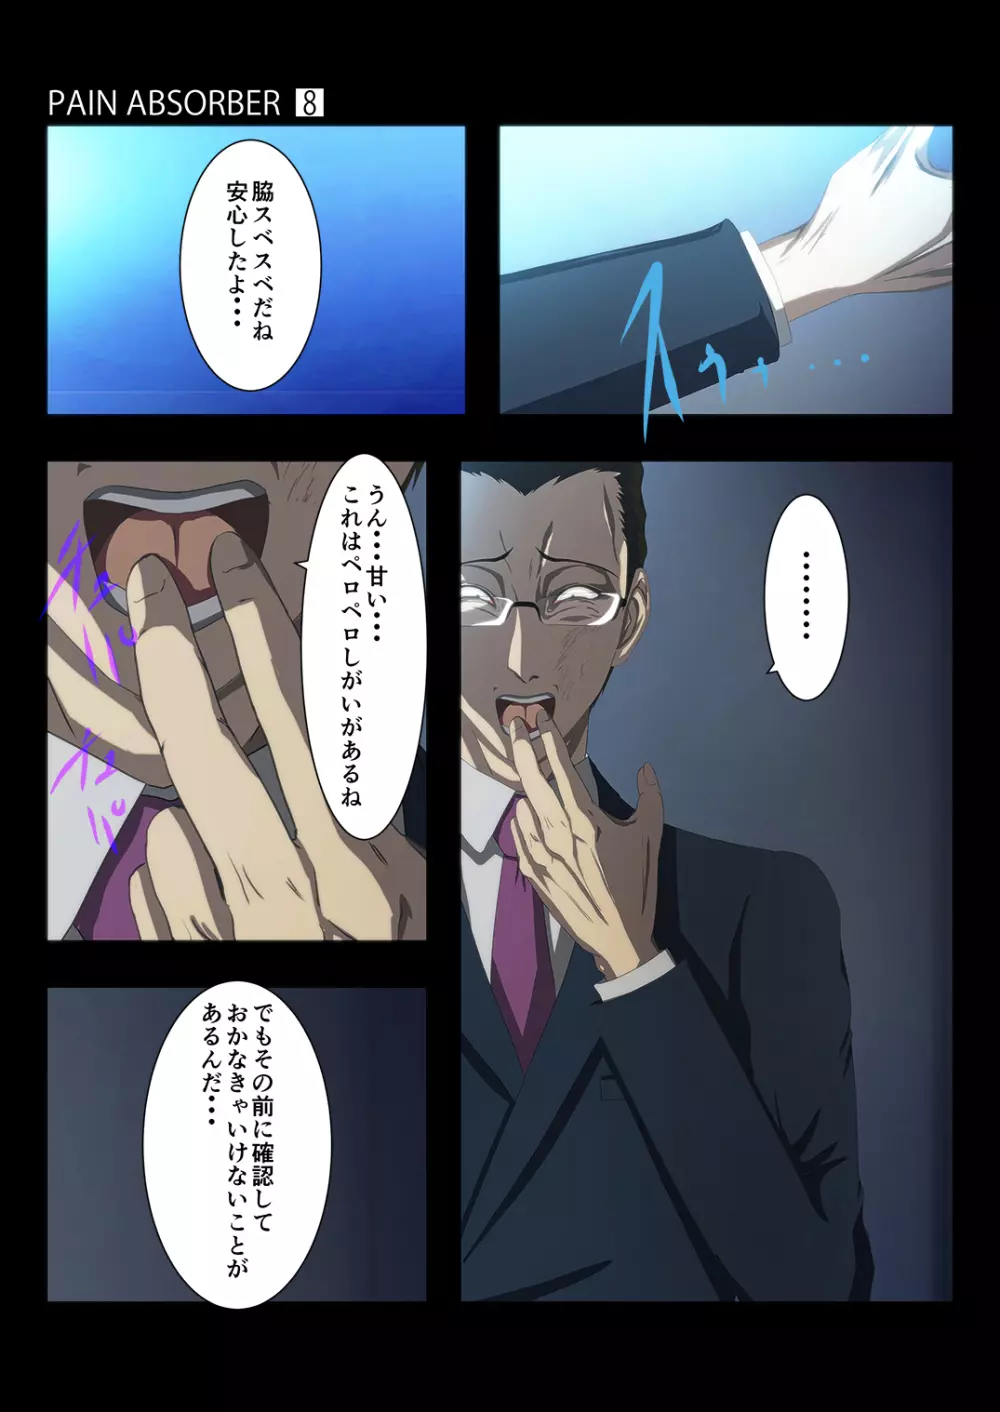 PAIN ABSORBER Episode.8 28ページ